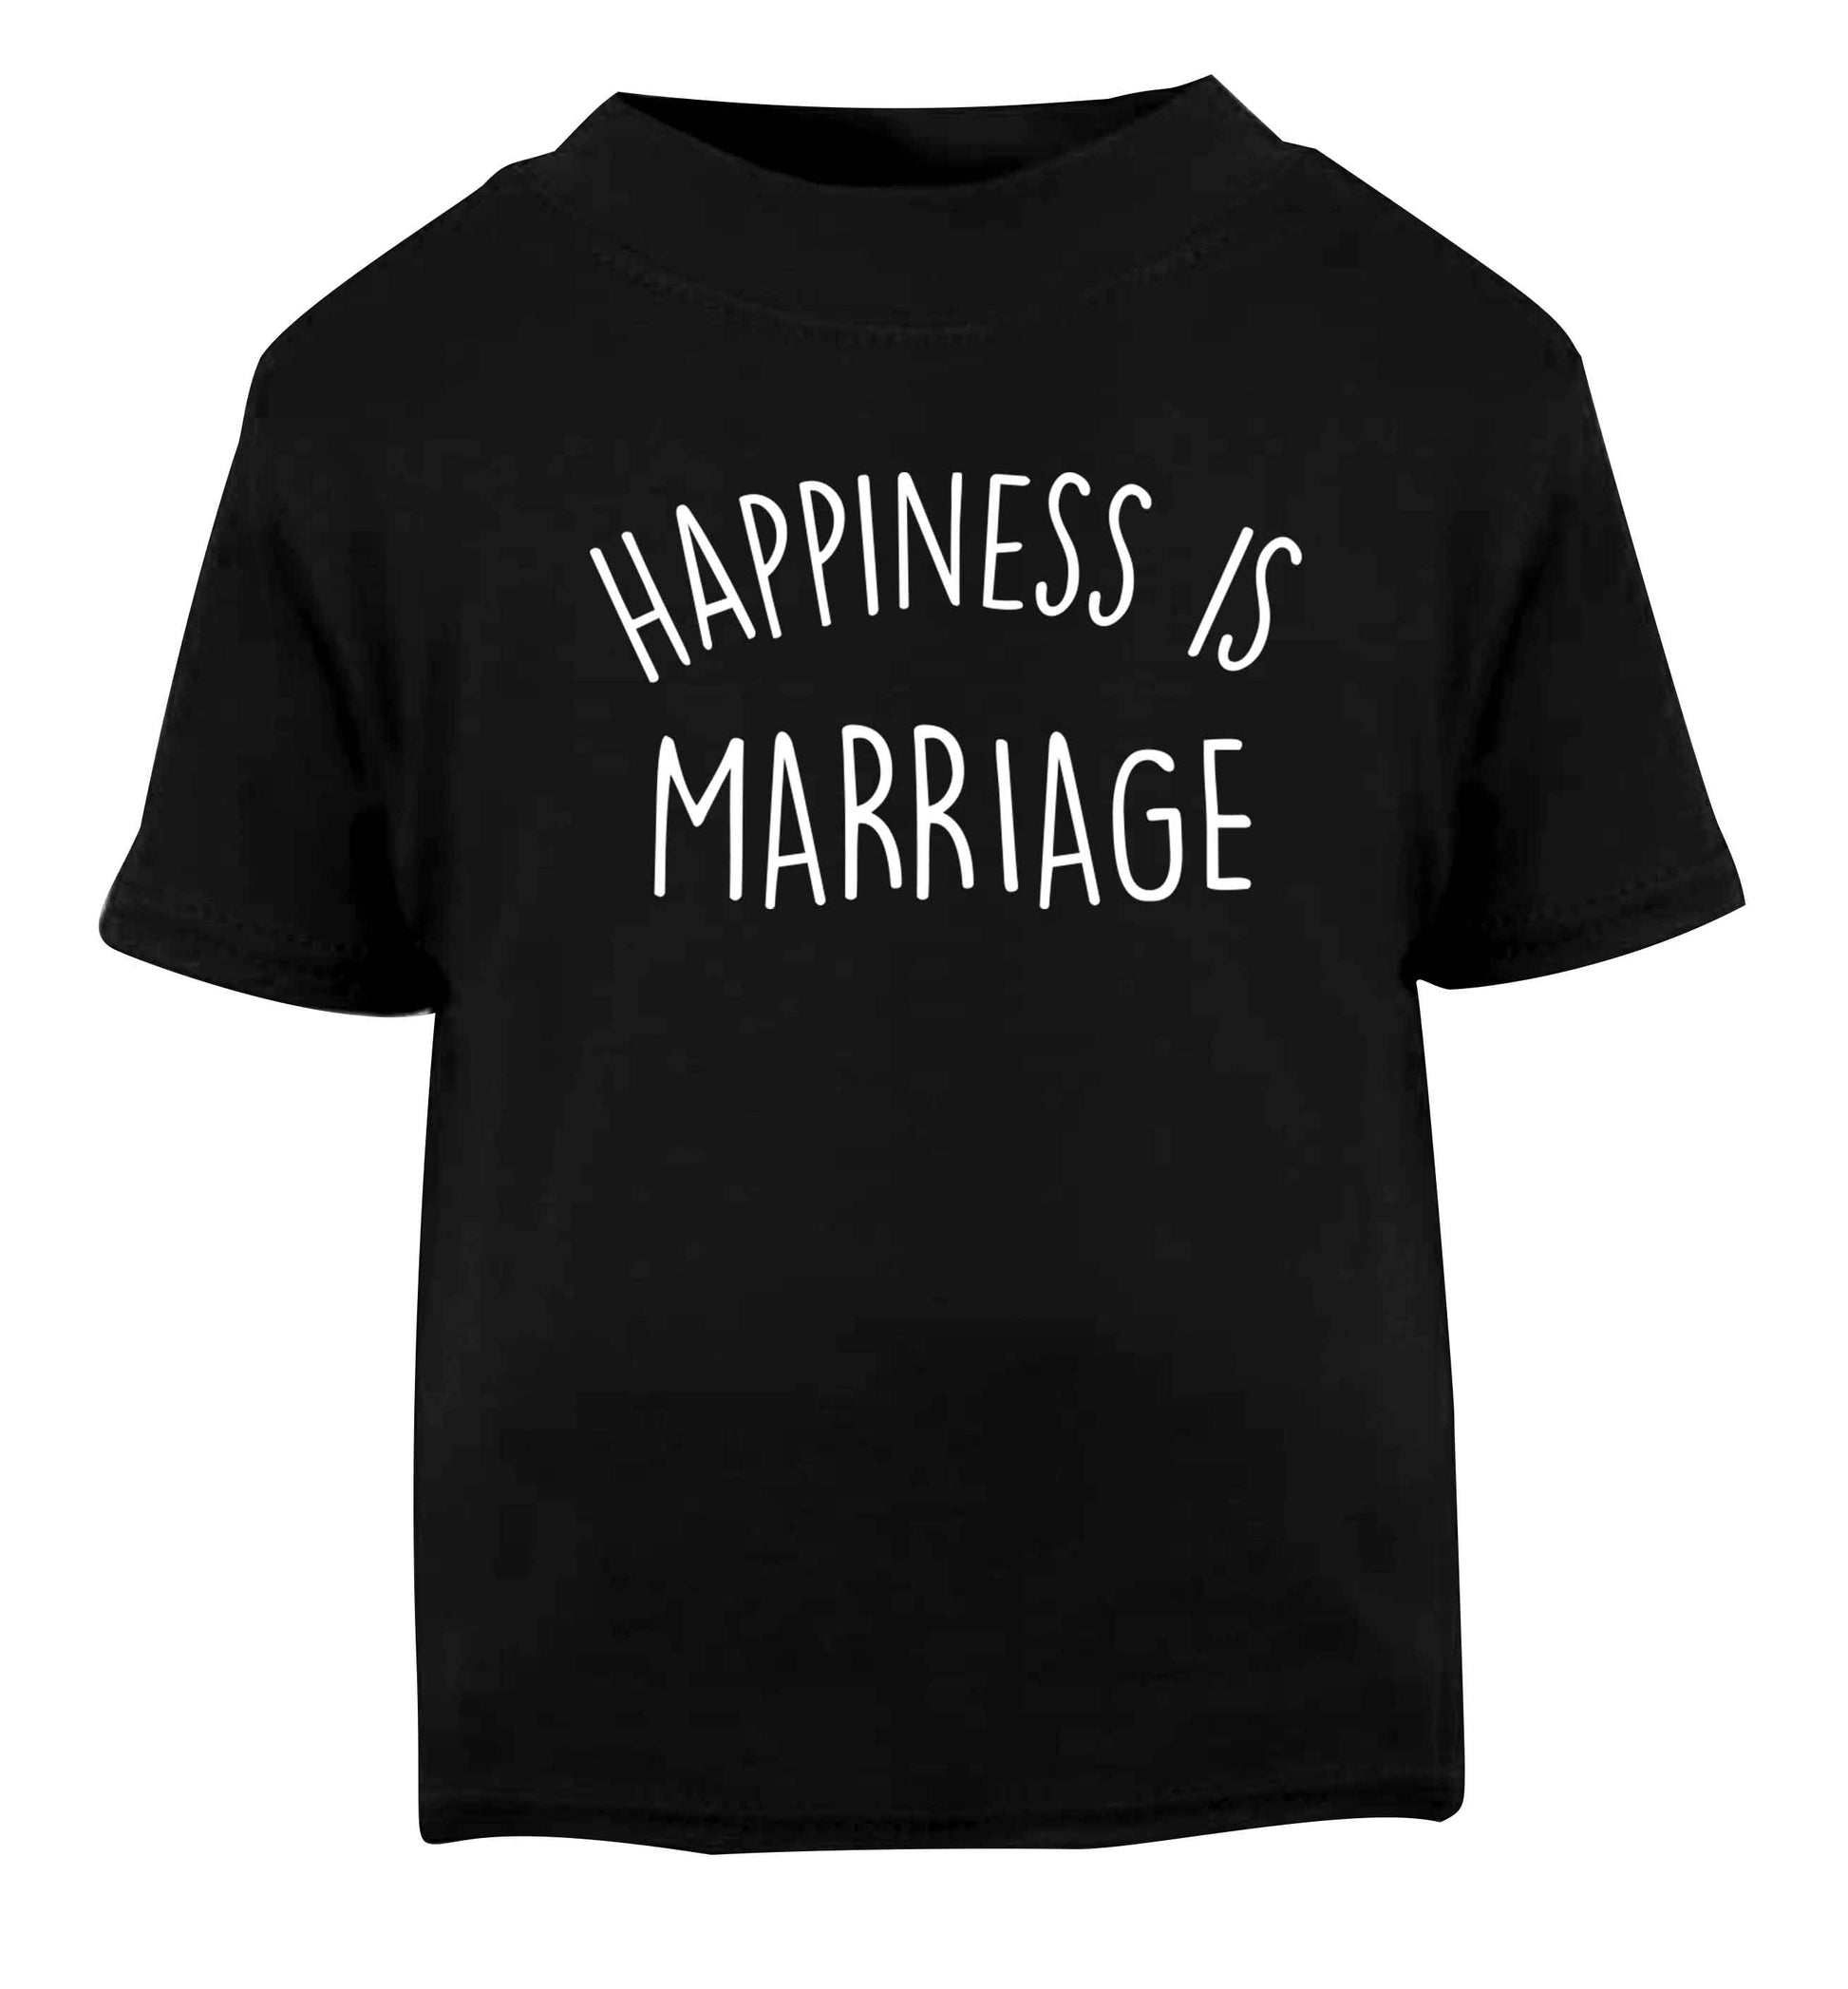 Happiness is wedding planning Black baby toddler Tshirt 2 years